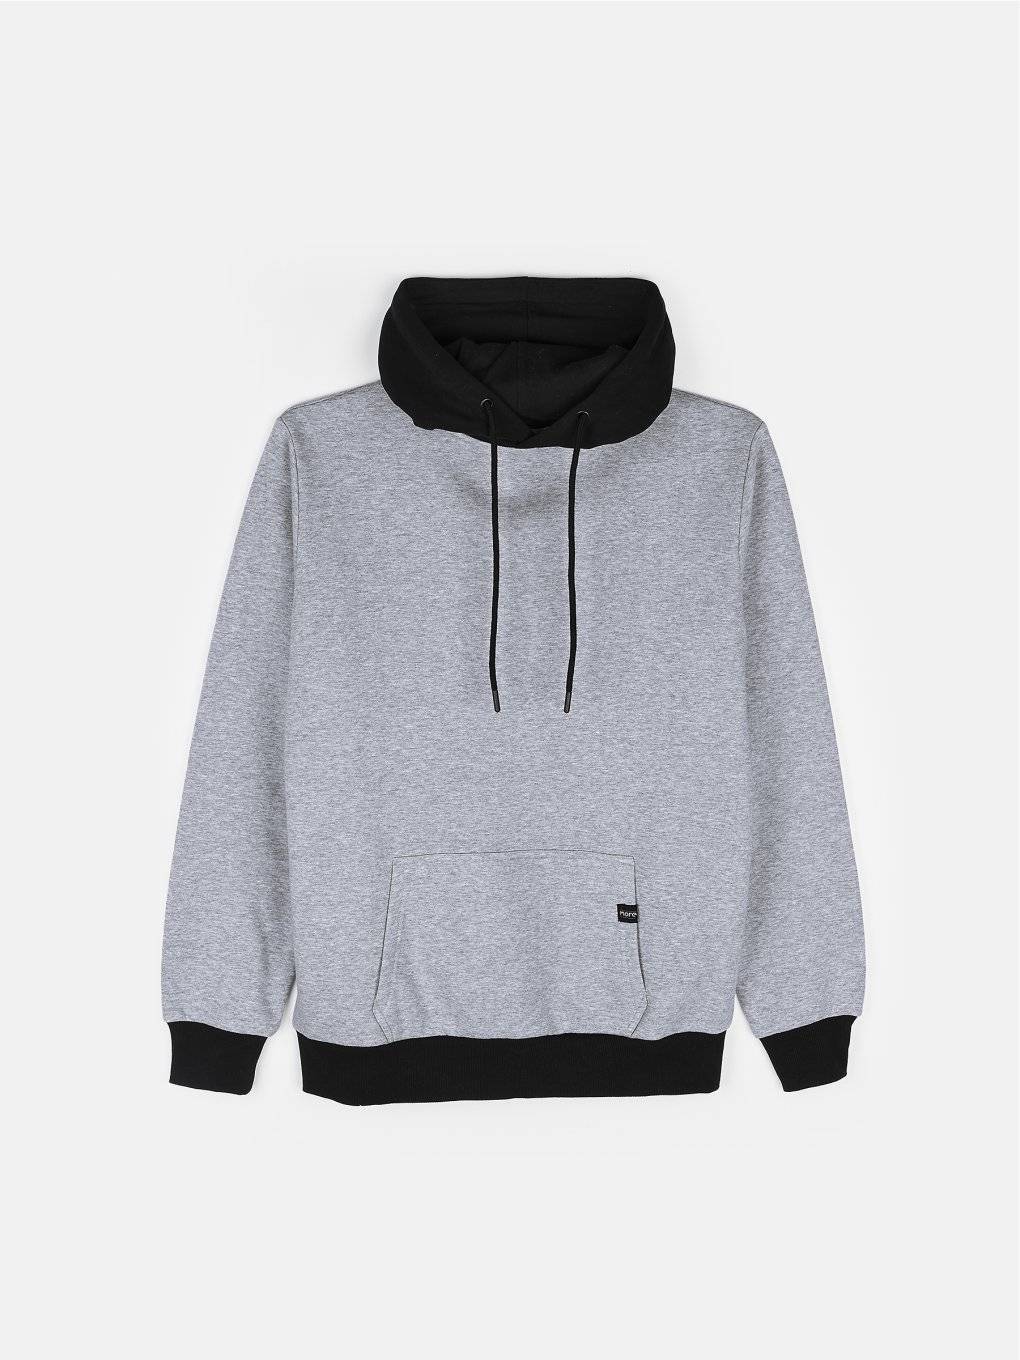 Hoodie with contrast details